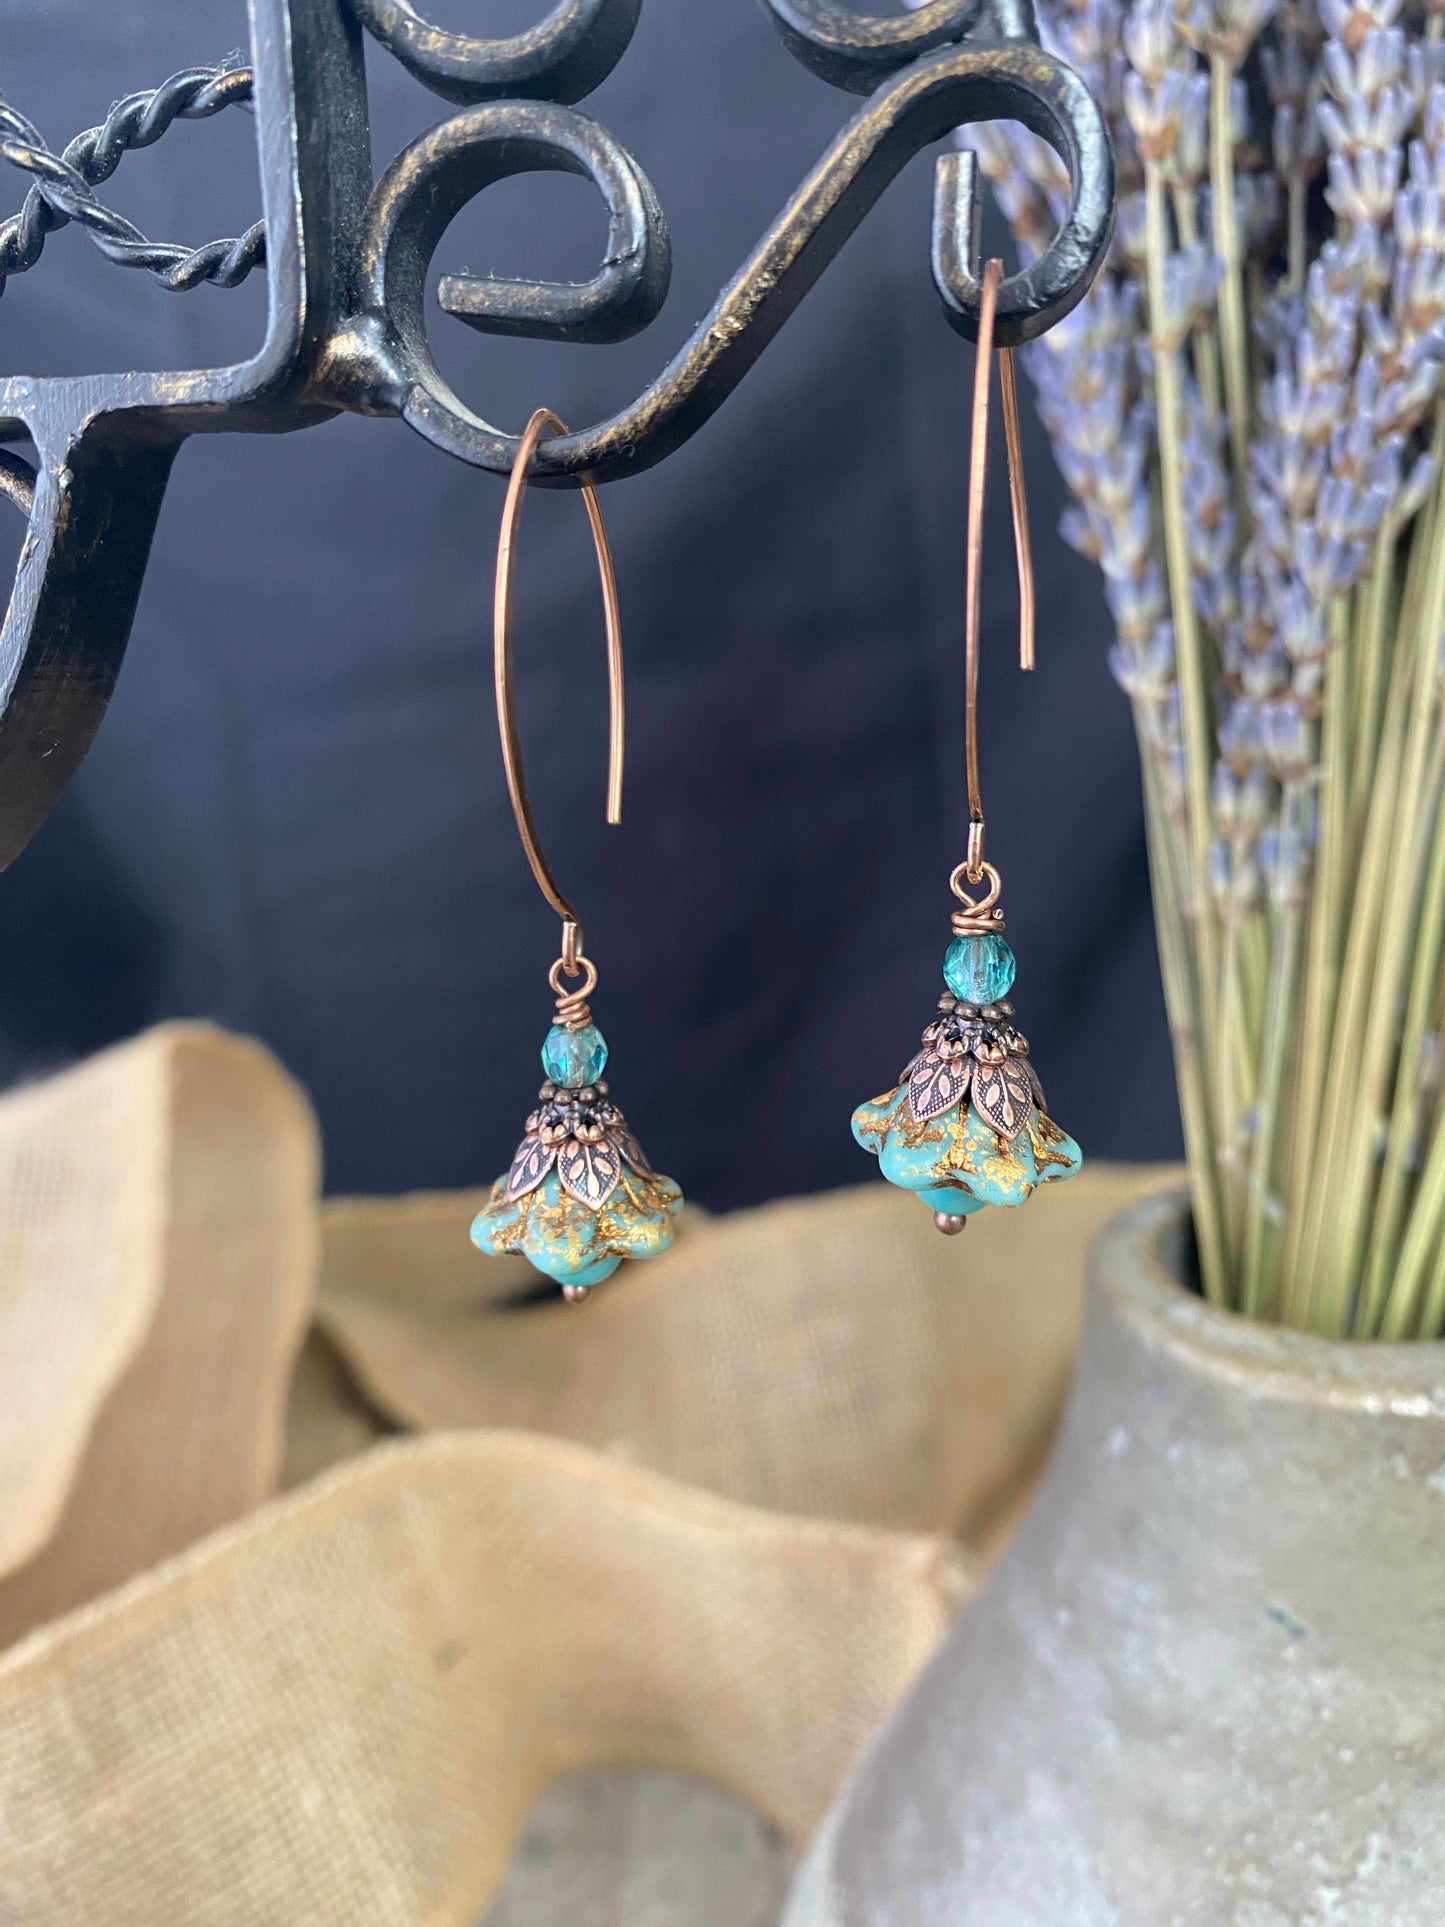 Turquoise Czech glass and pearls. Copper flower bead caps, bronze metal, earrings